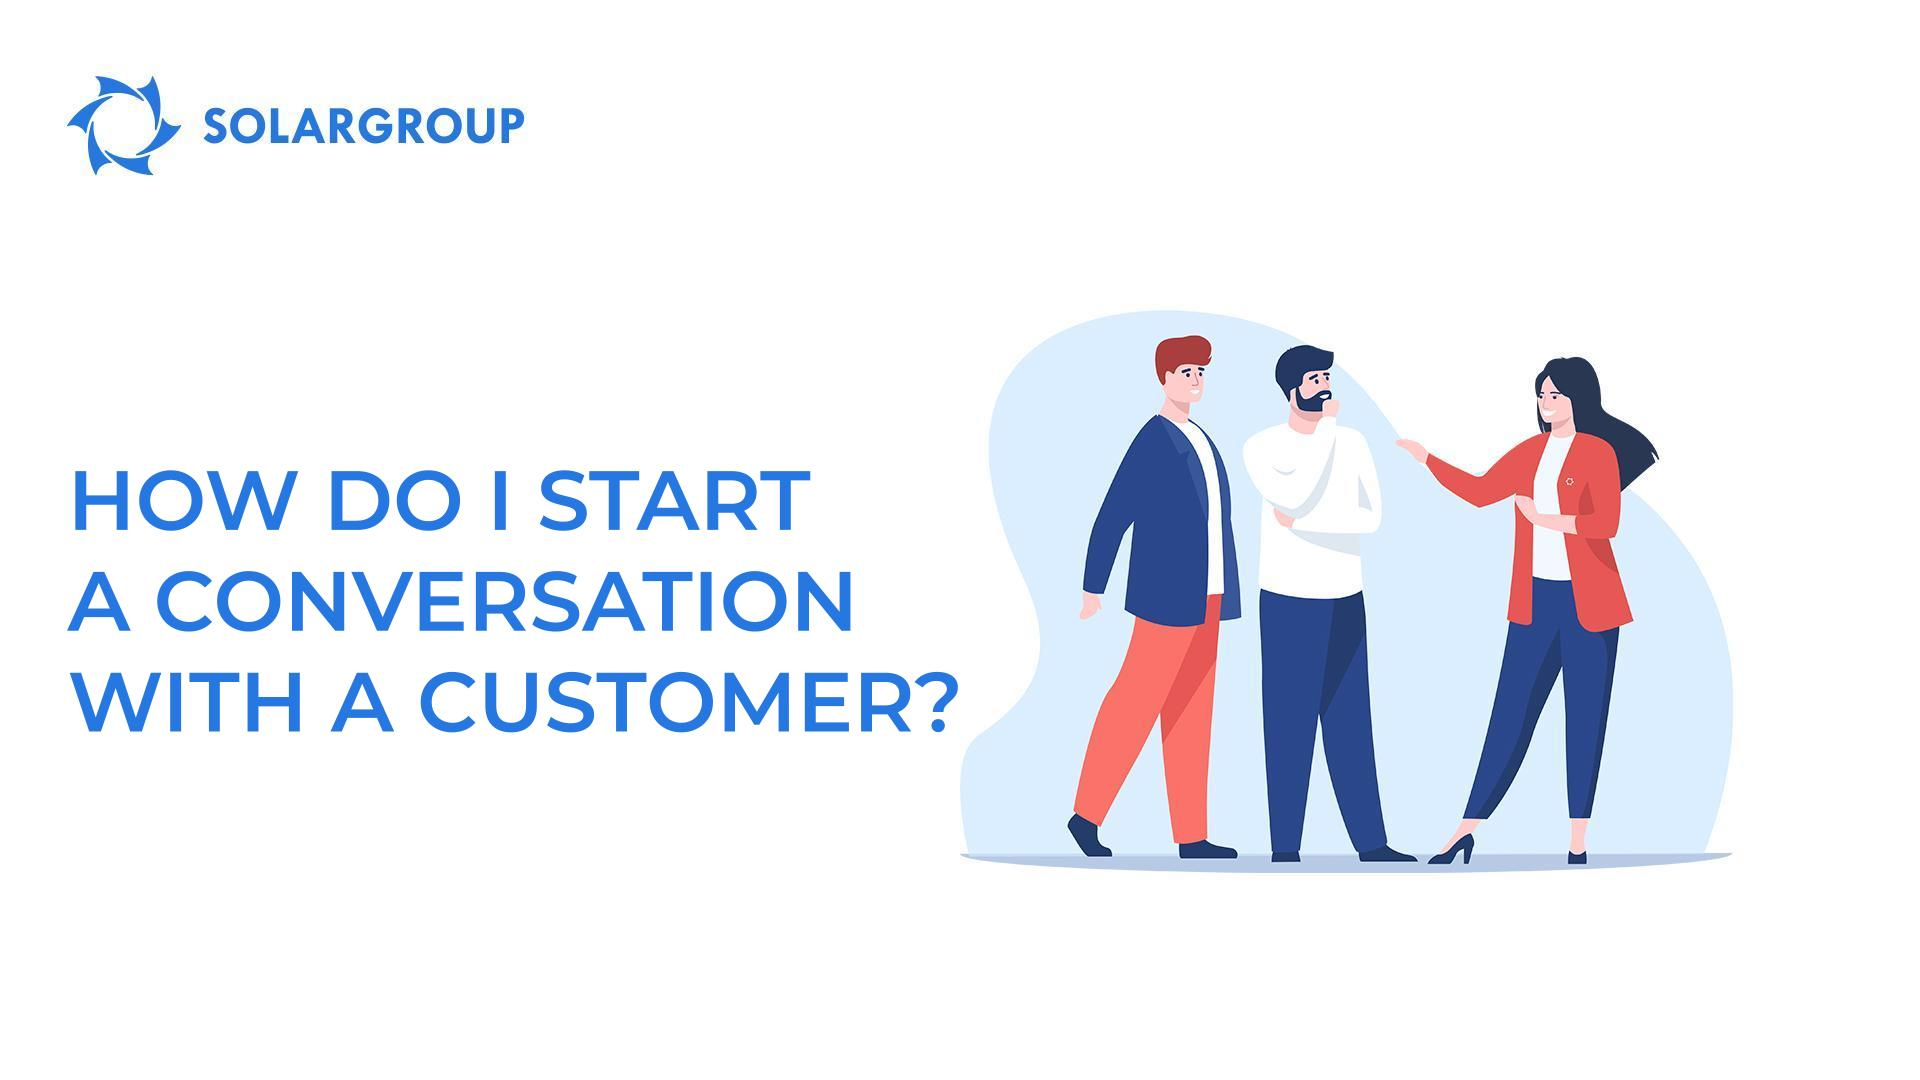 How do I start a conversation with a customer?